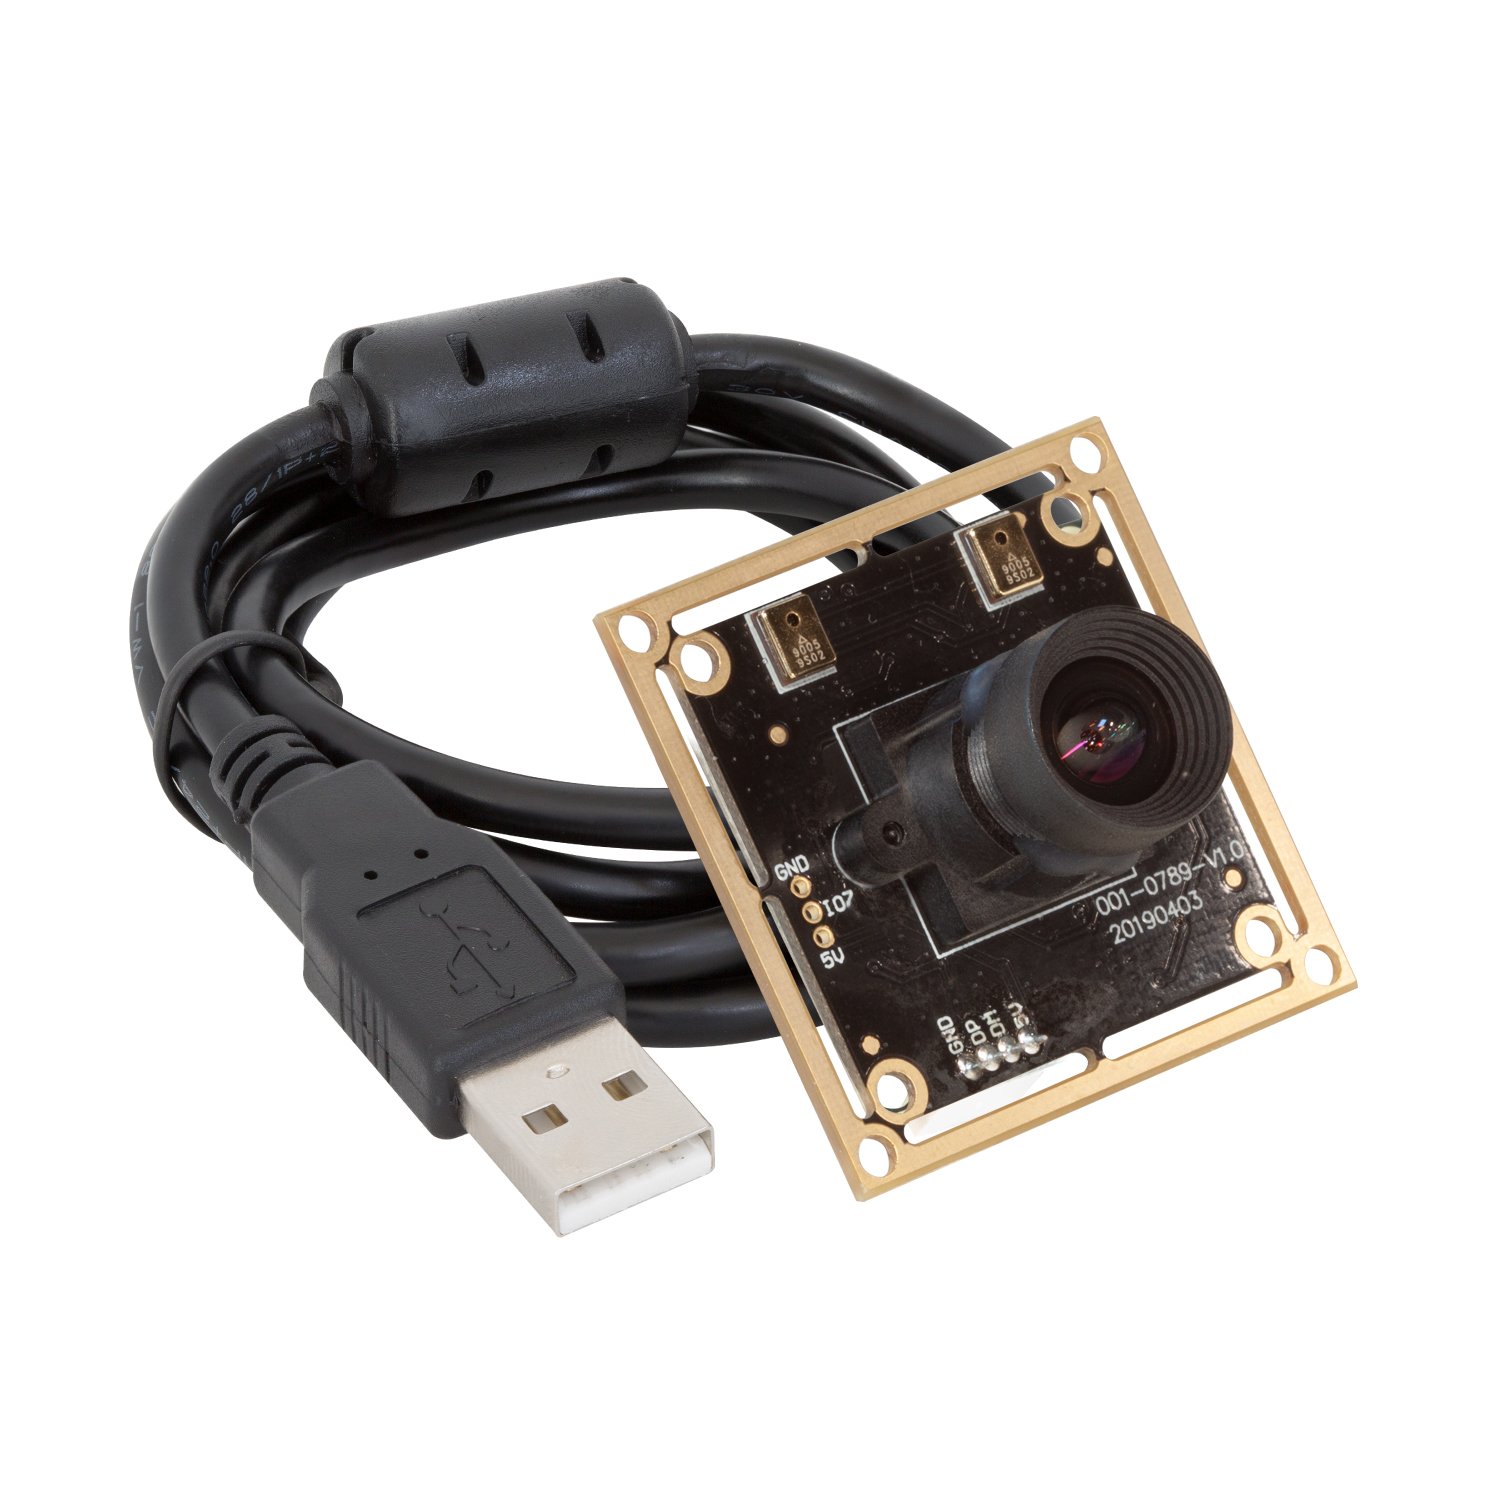 1pcs OV2710 2MP 1080P HD USB Camera Module with 100 Degree distortionless Lens and 1M USB Cable 